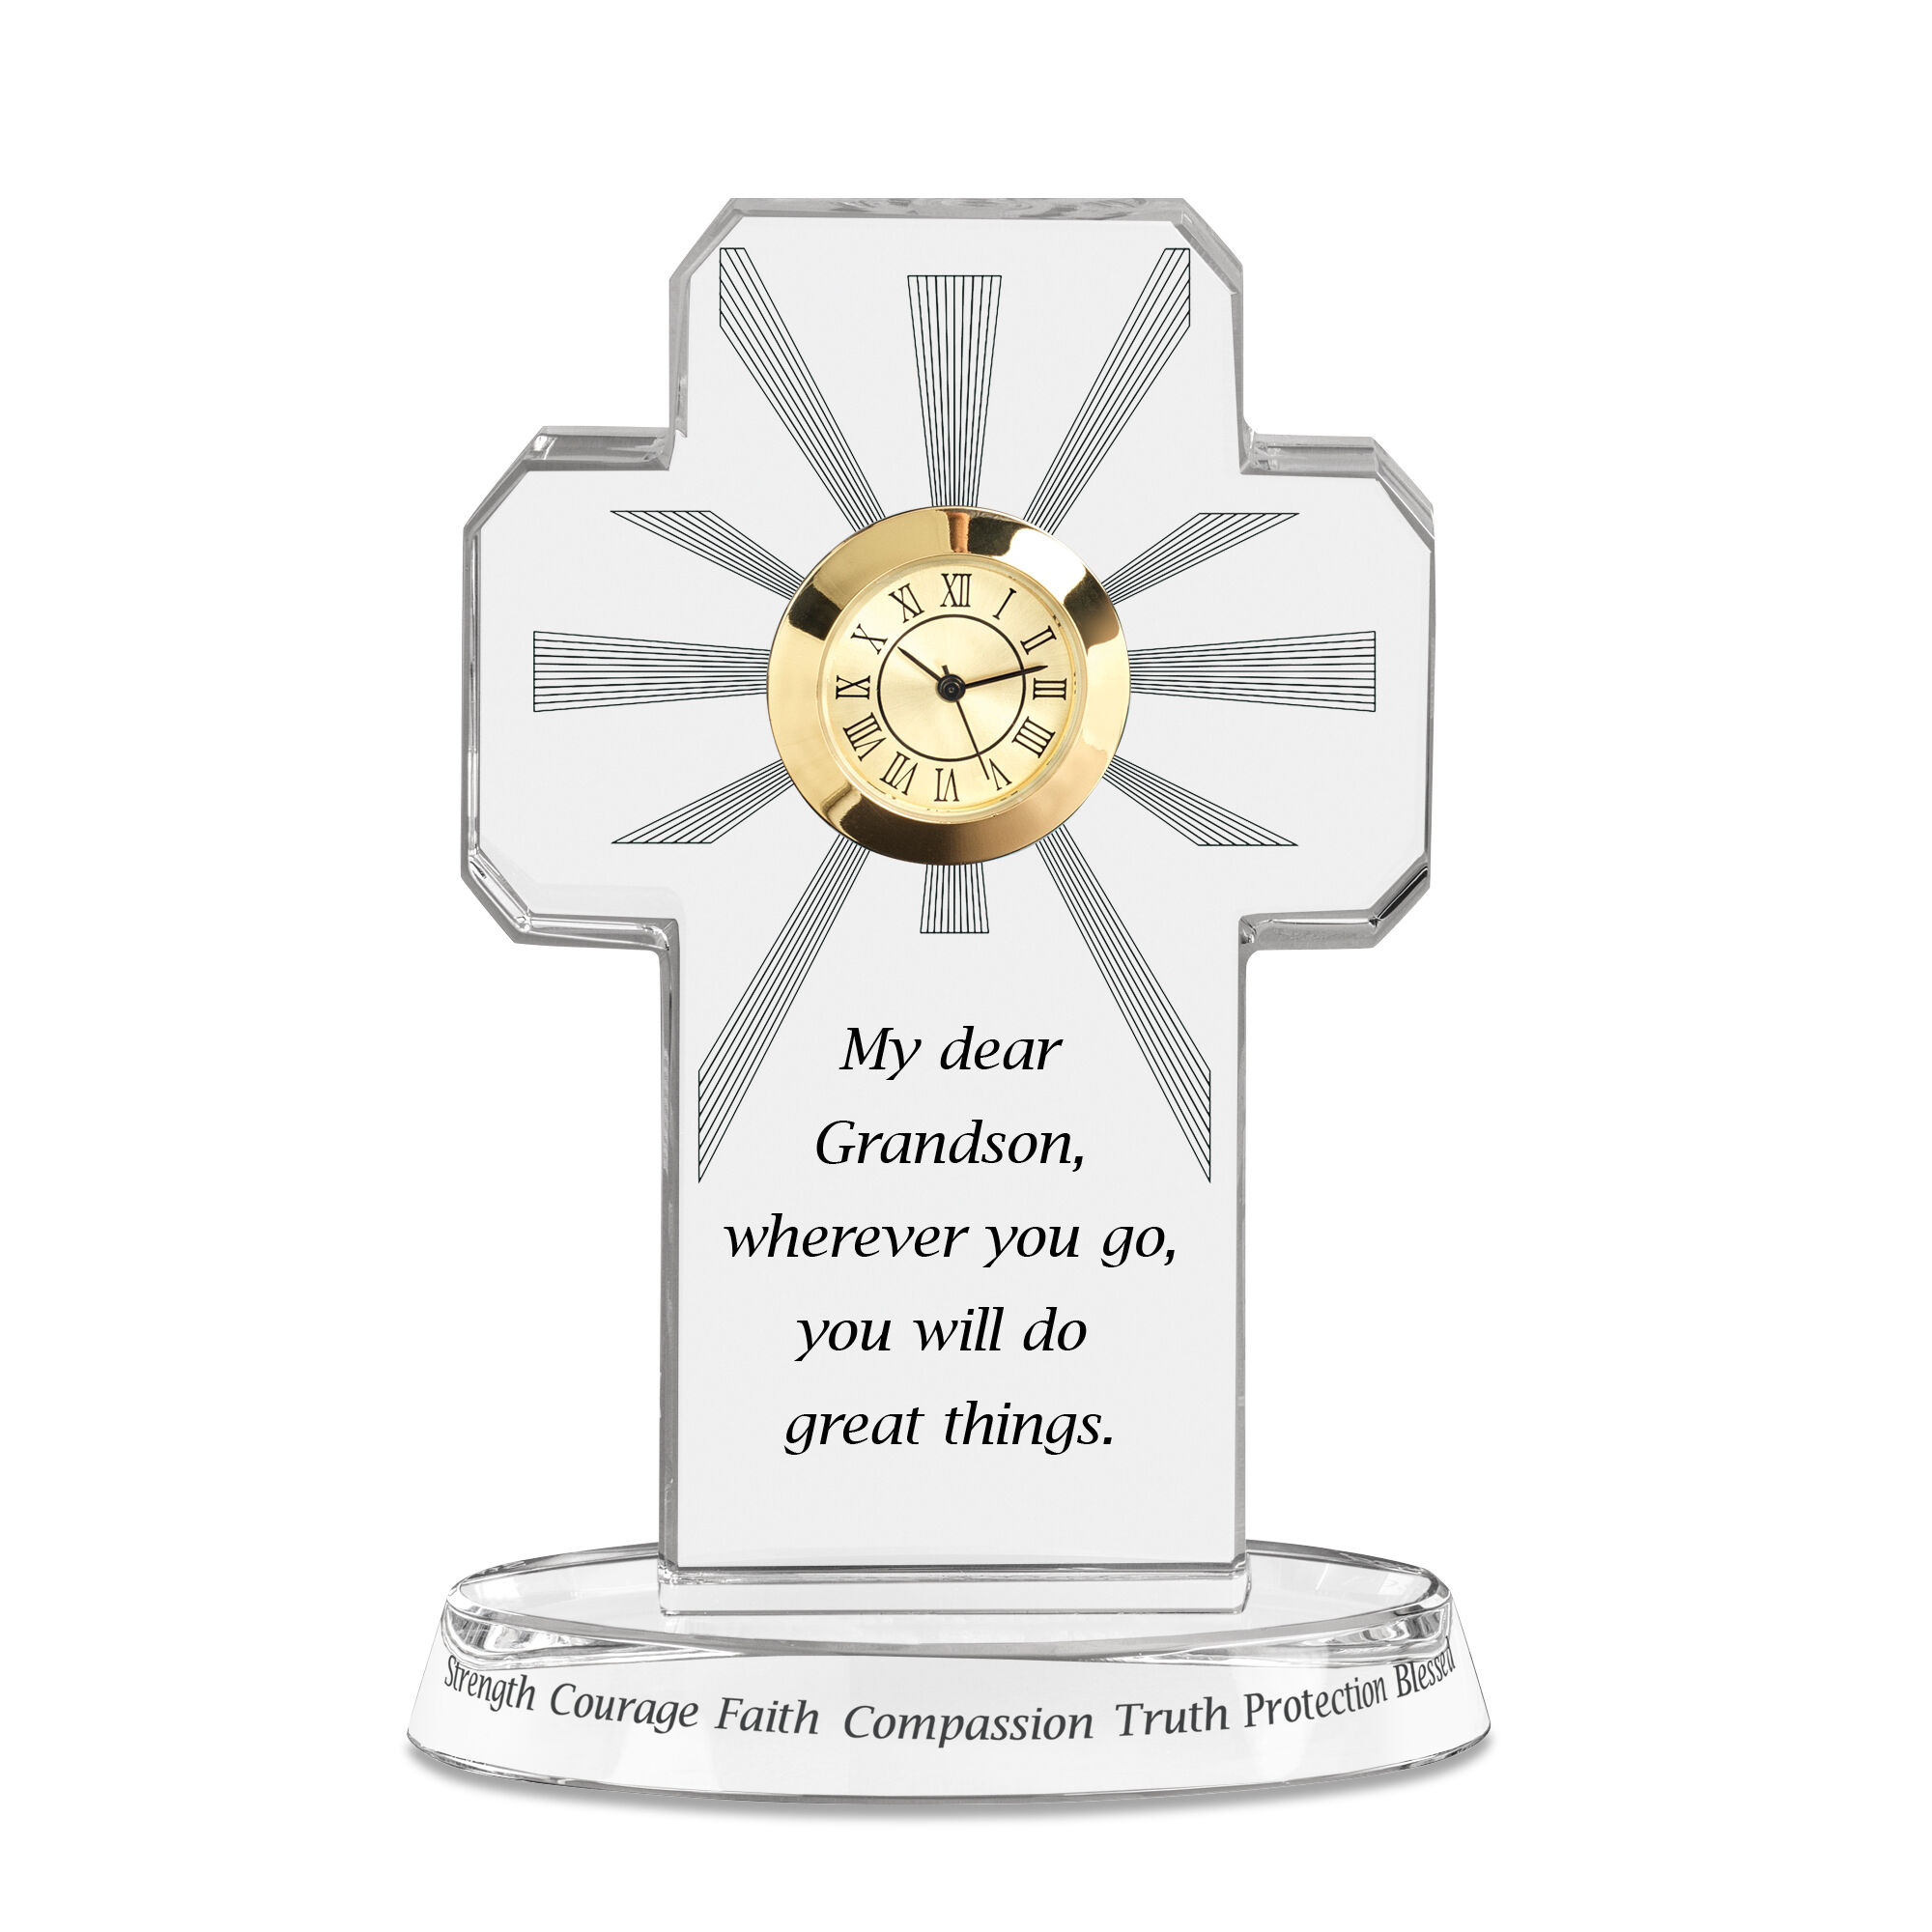 My Blessed Grandson Crystal Desk Clock 6654 0014 a main